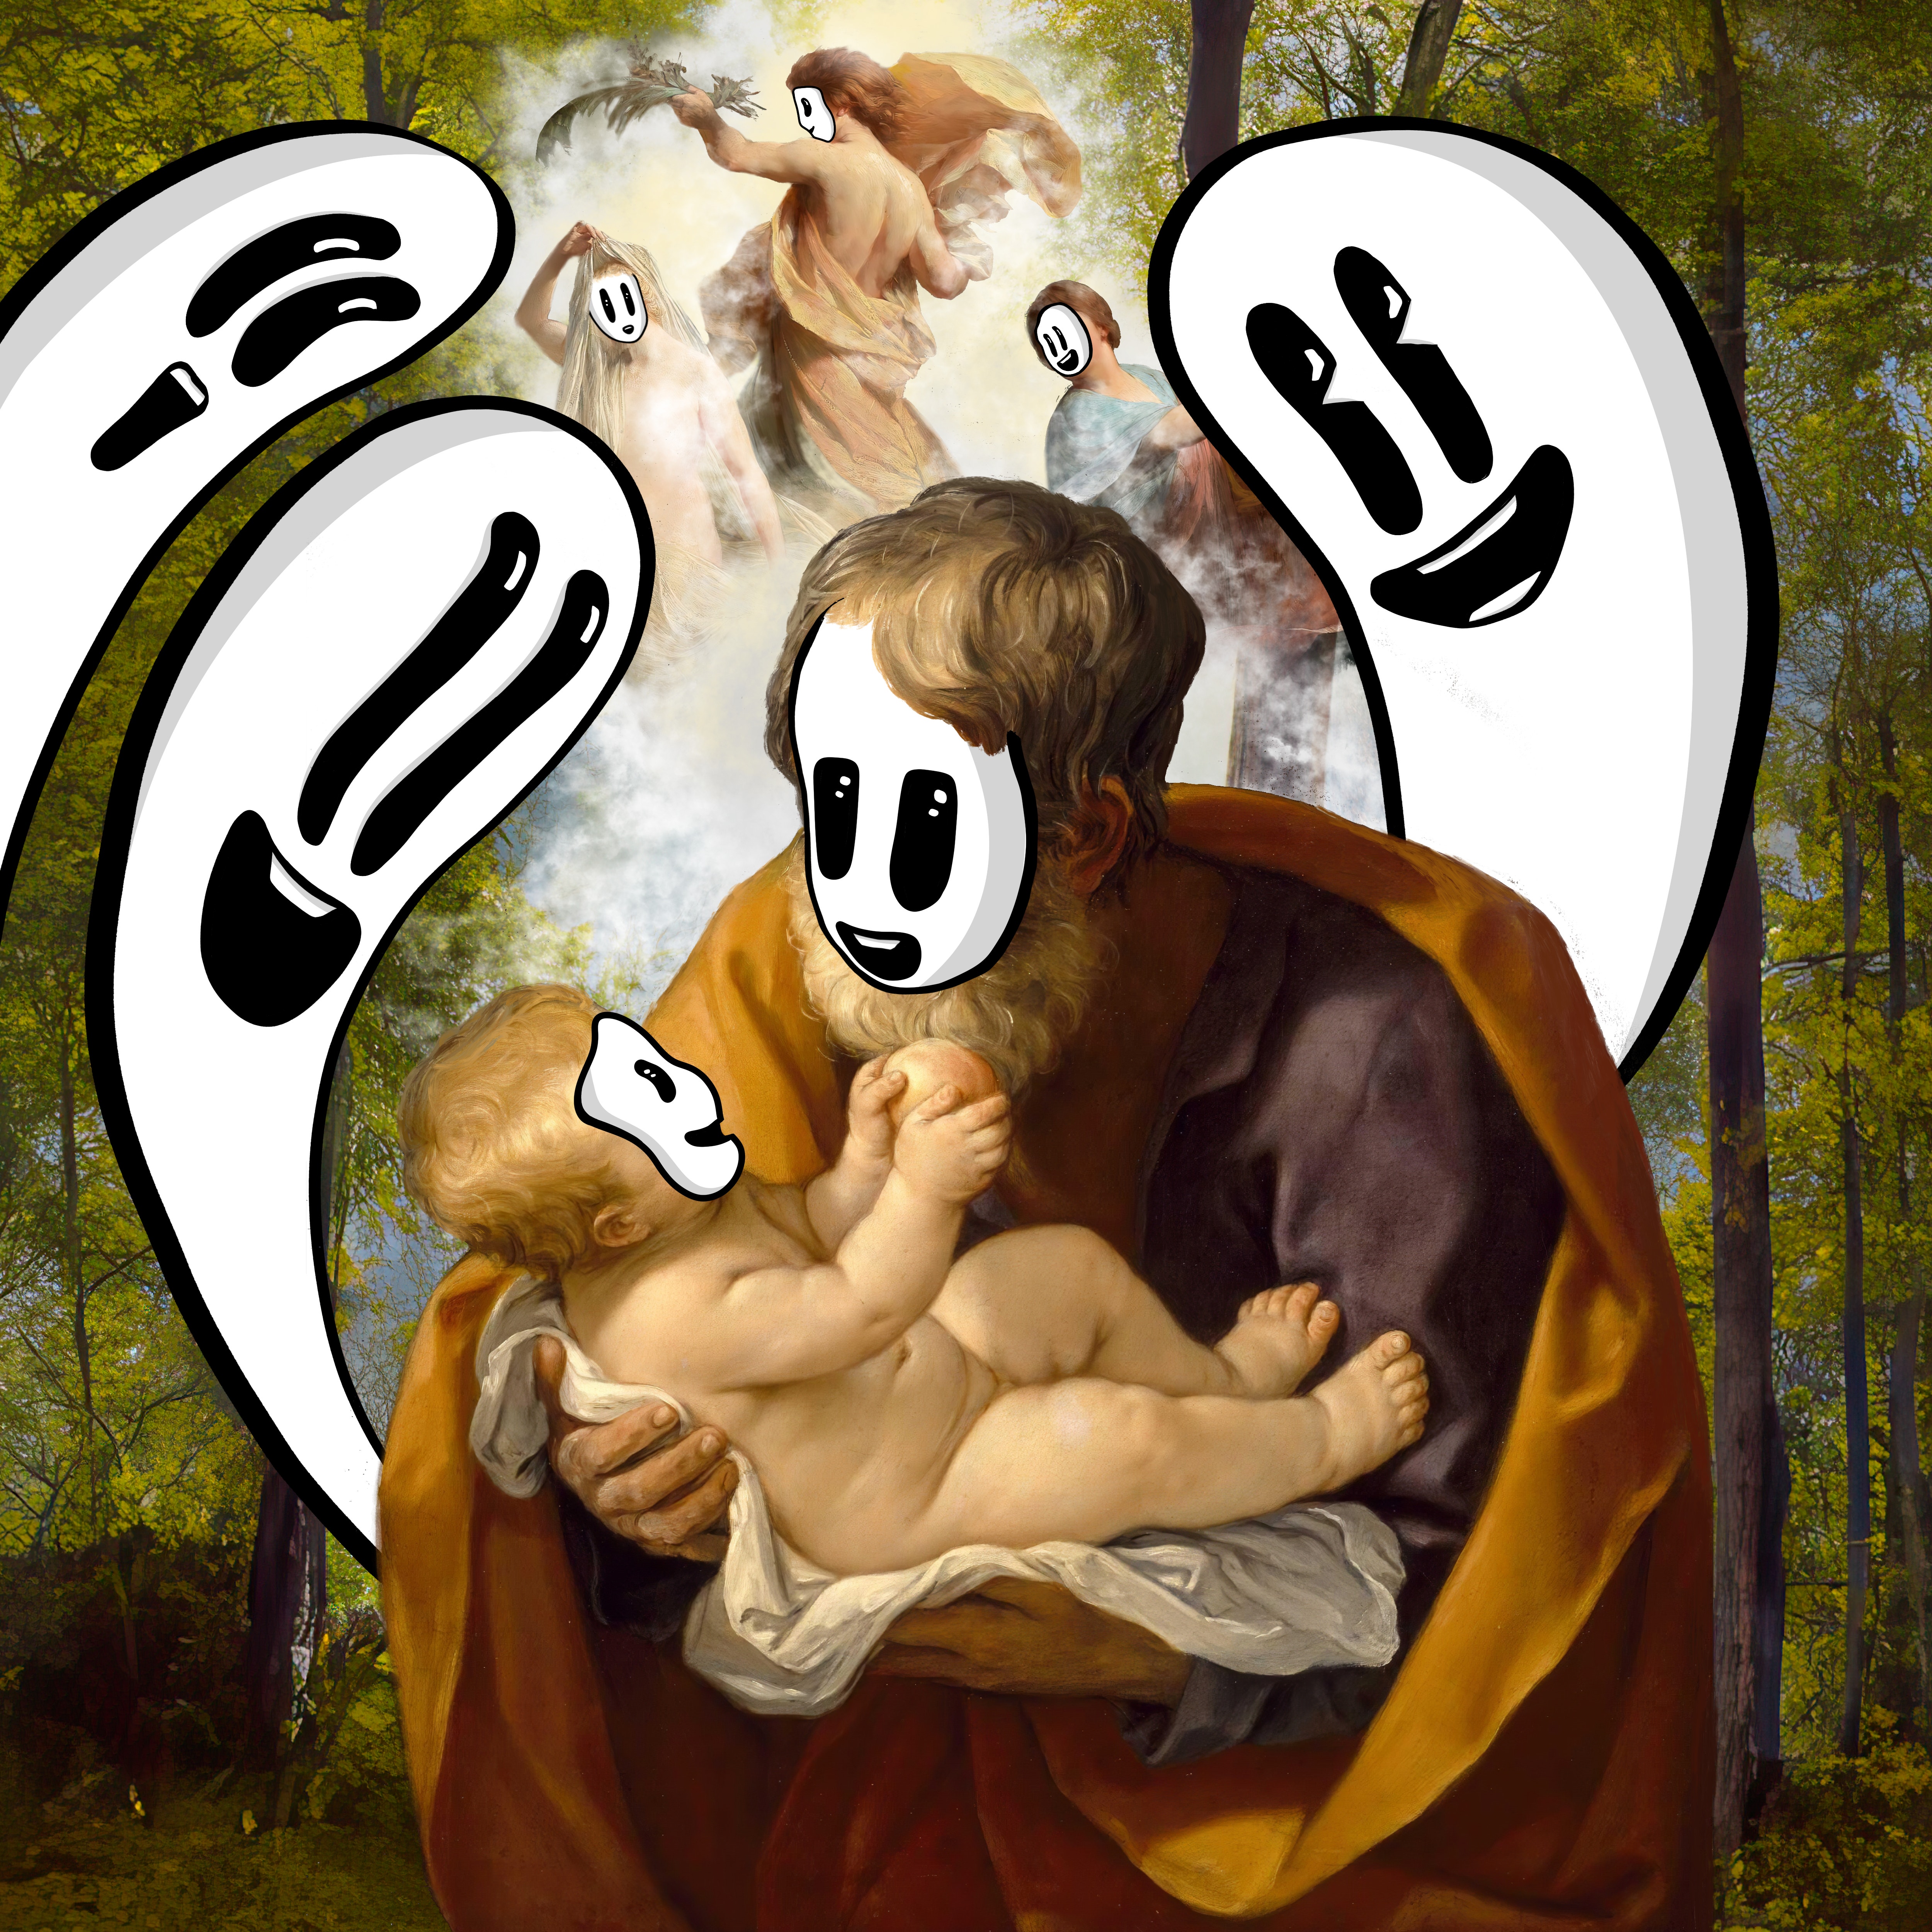 The Saint and The Child